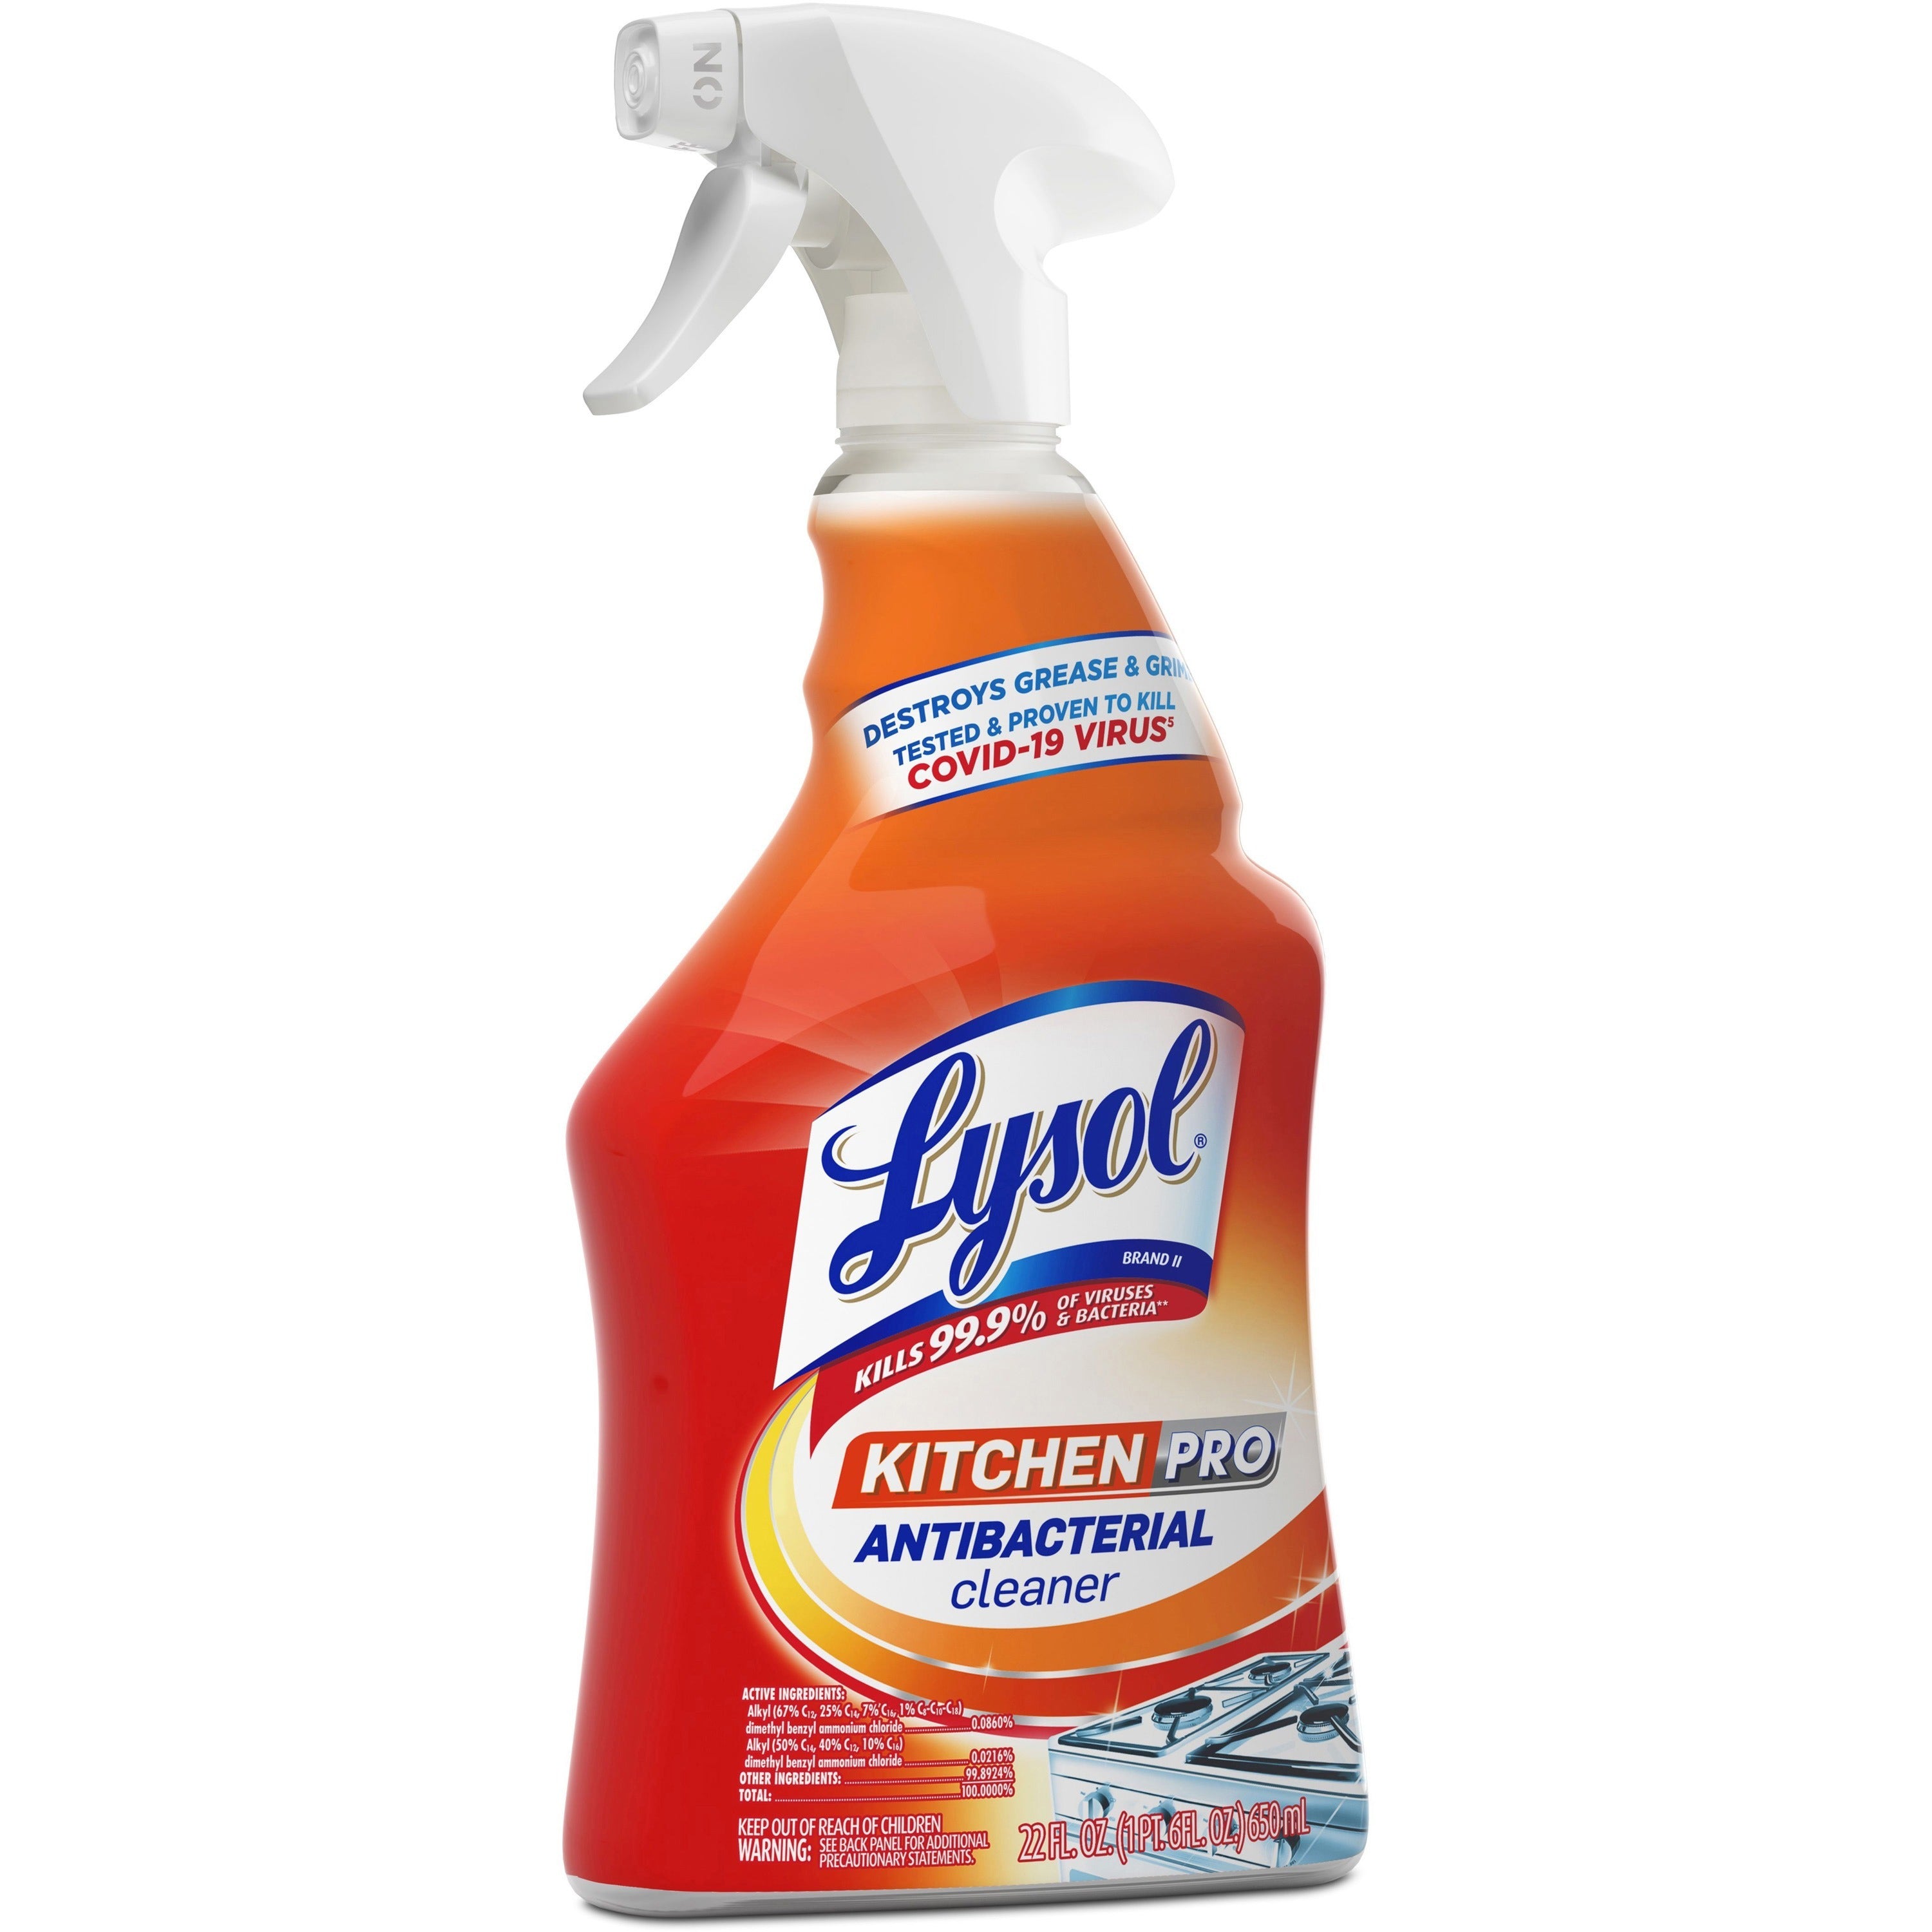 lysol-kitchen-pro-antibacterial-cleaner-for-multi-surface-22-fl-oz-07-quart-fresh-citrus-scent-9-carton-deodorize-streak-free-chemical-free-disinfectant-anti-bacterial-residue-free-clear_rac79556ct - 4